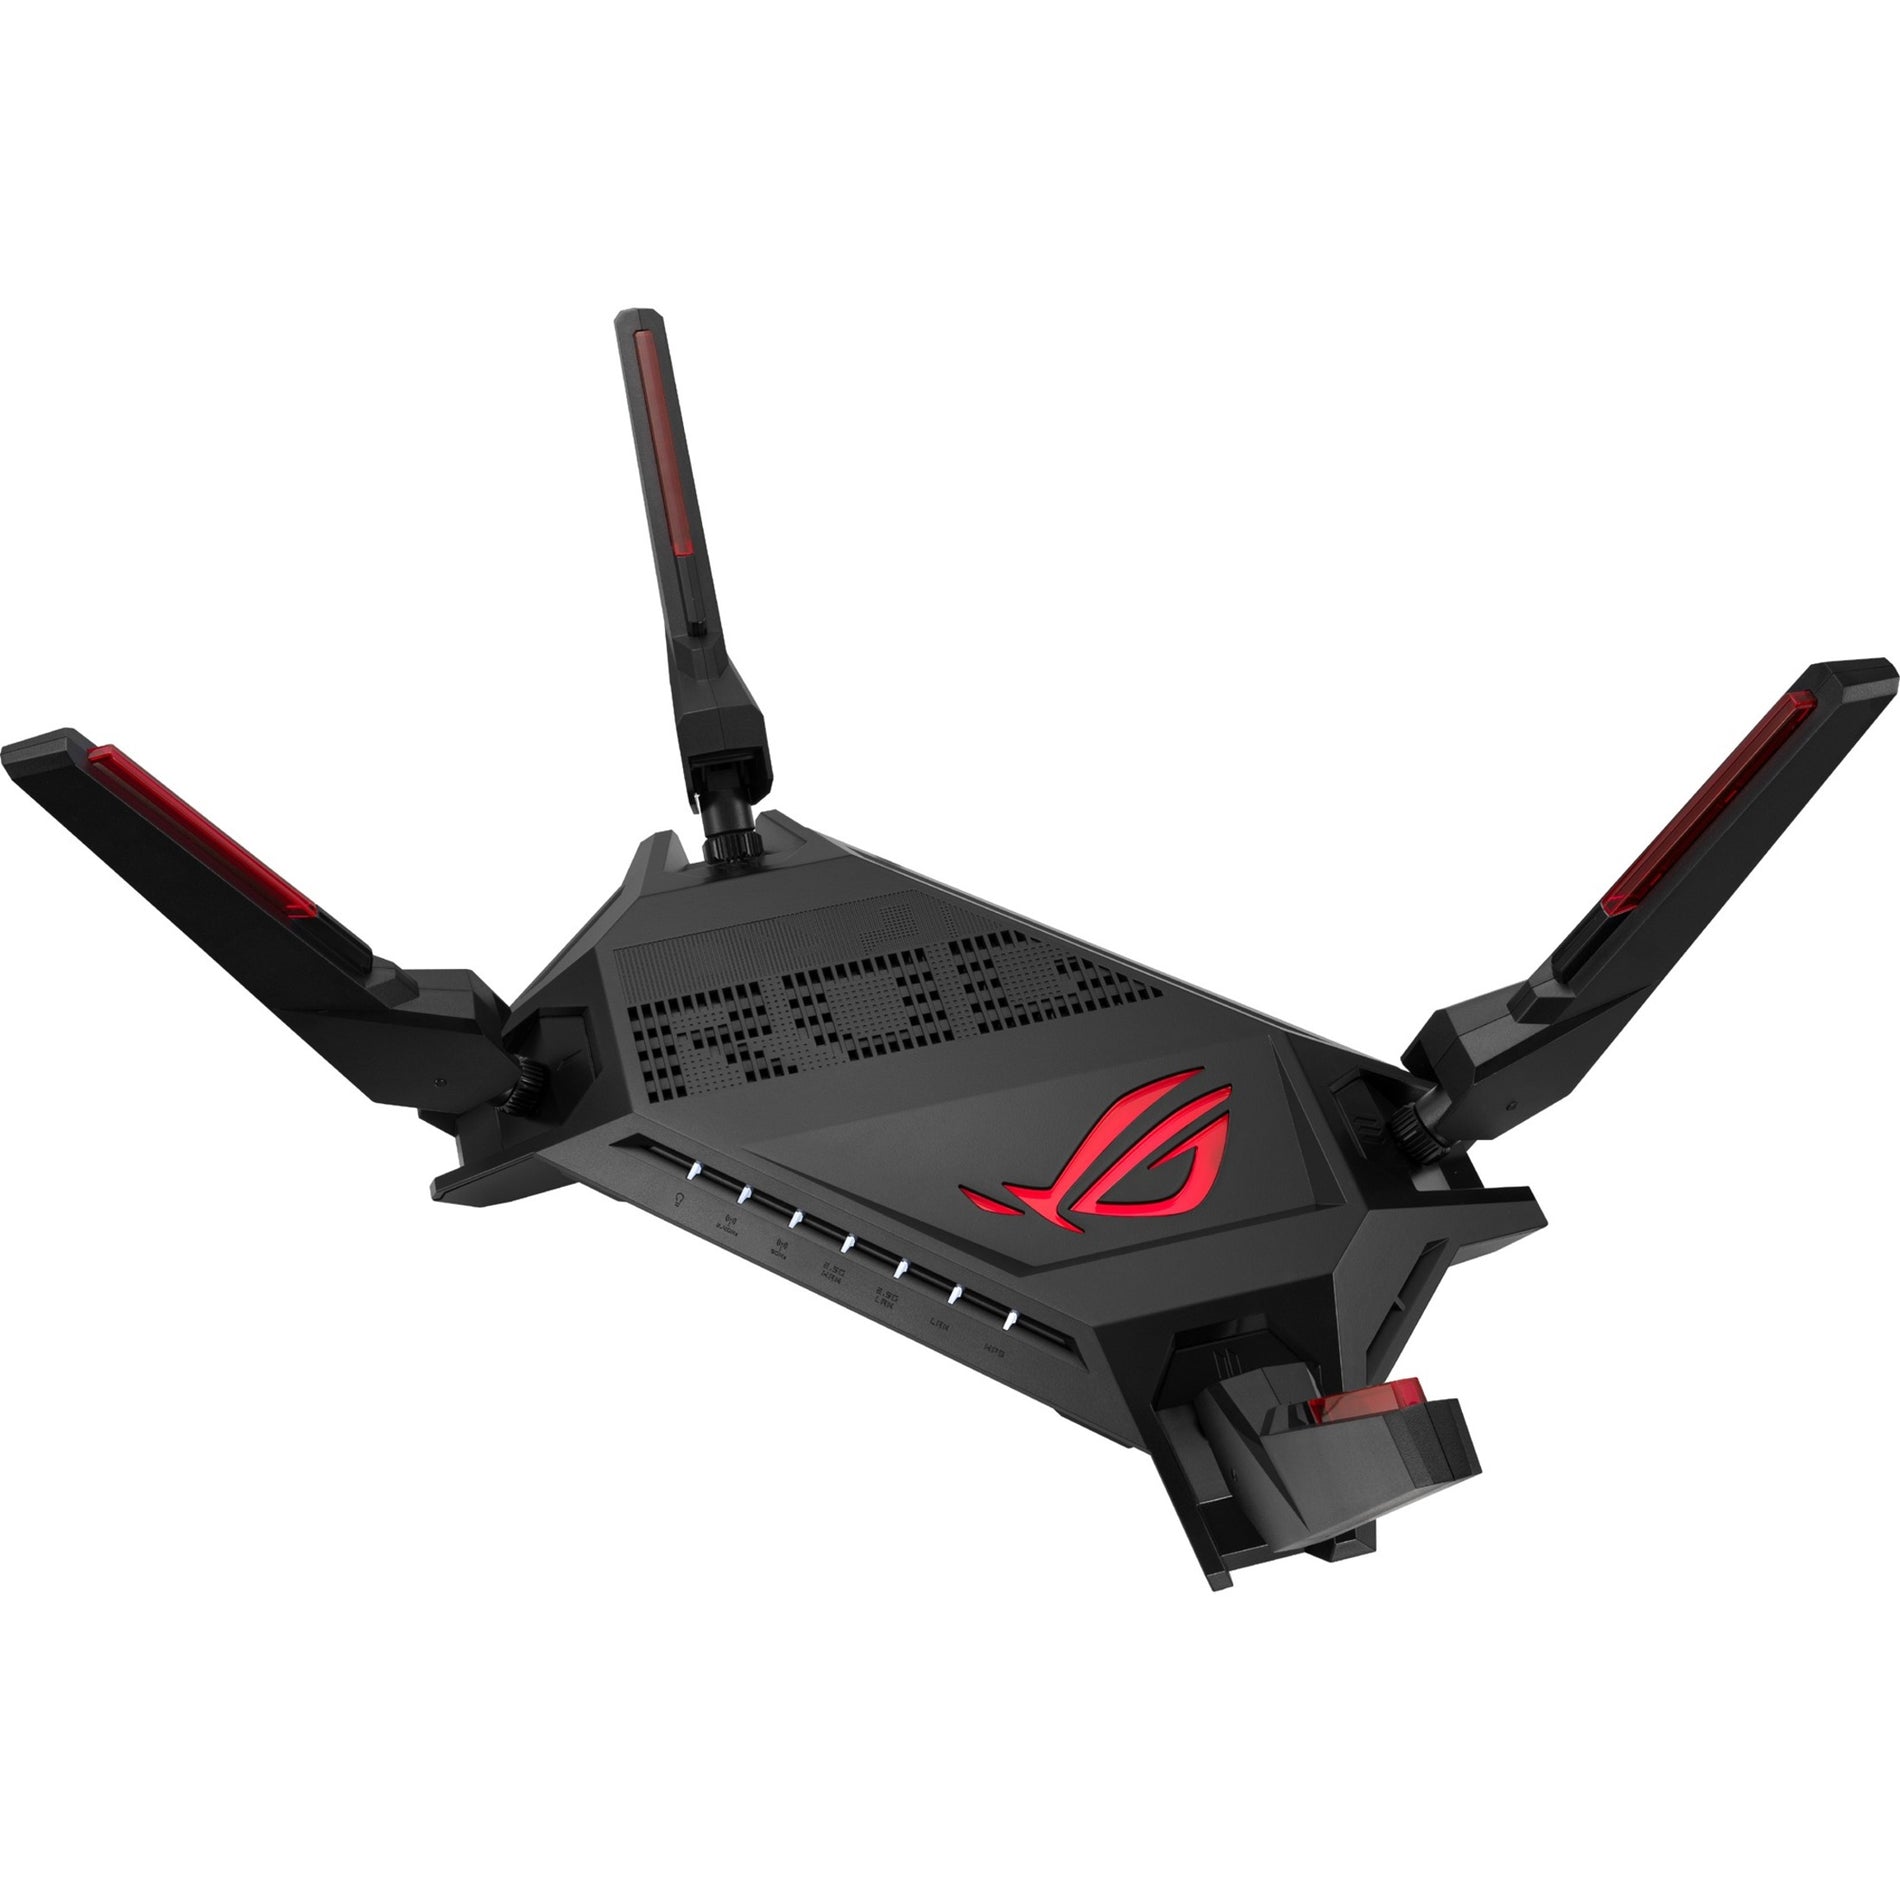 Asus ROG GT-AX6000 Rapture Wireless Router, Wi-Fi 6, 2.5 Gigabit Ethernet, 744 MB/s